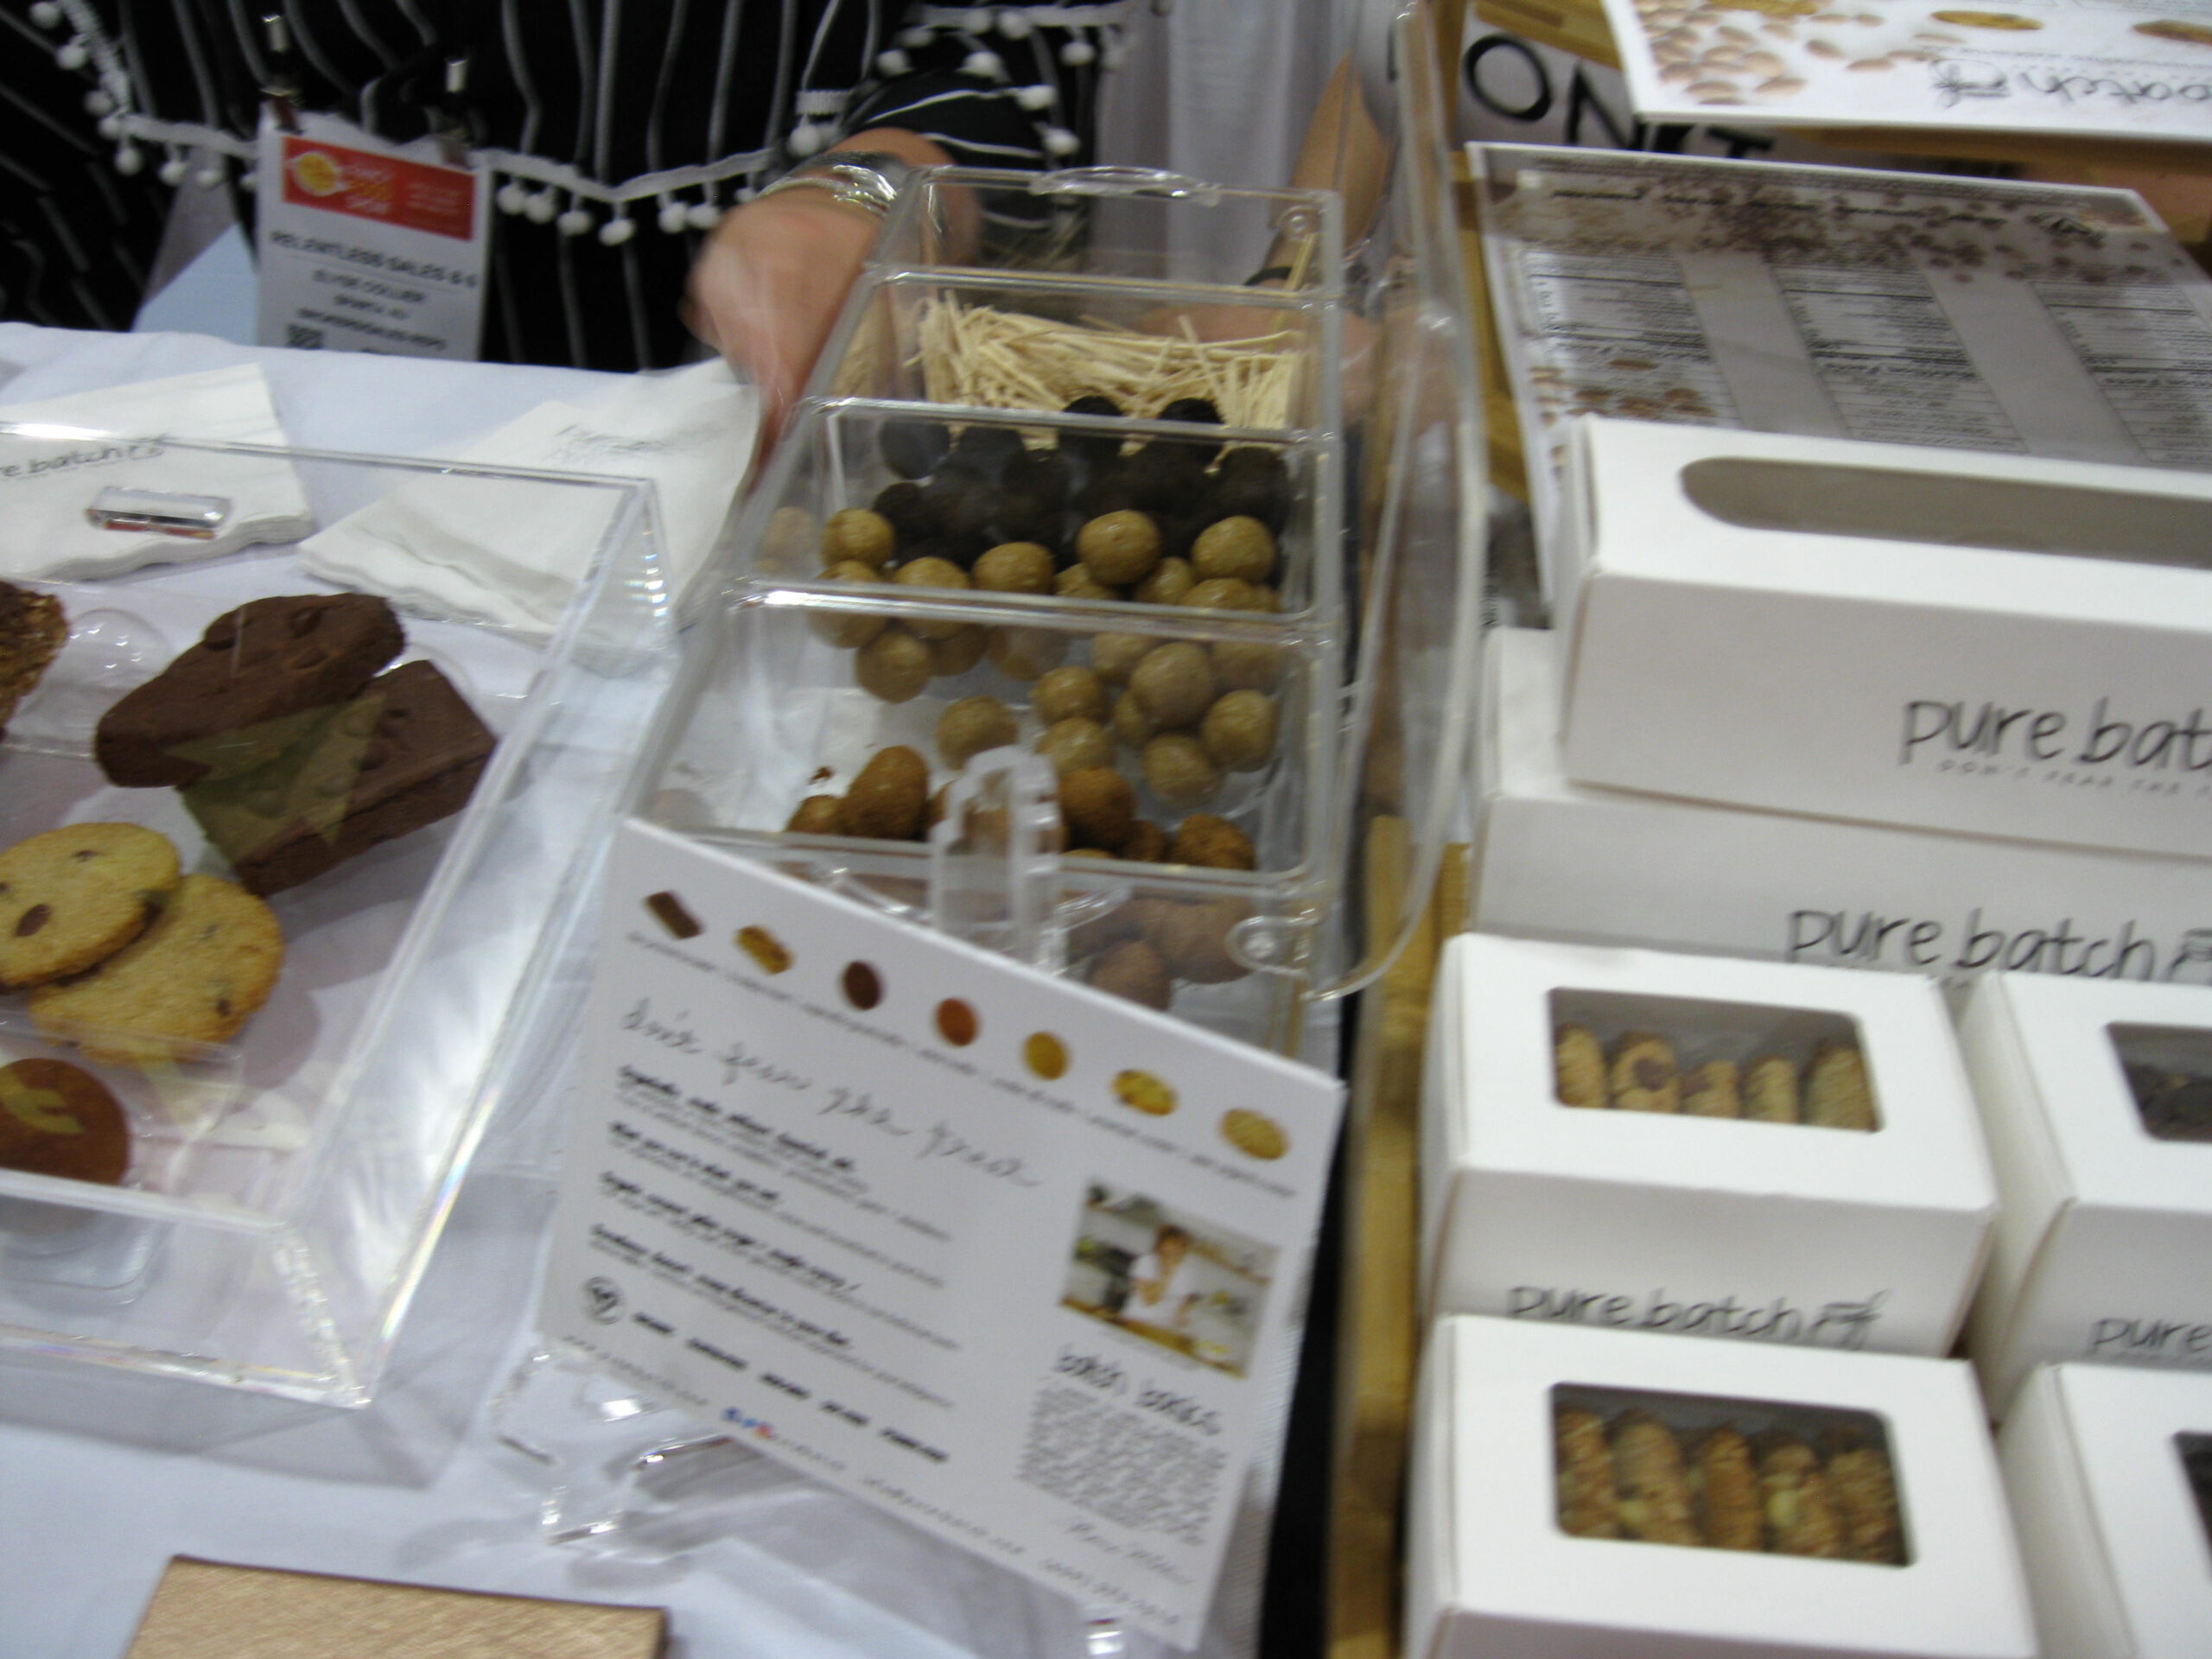 Pure Batch baked goods on display at the Summer Fancy Food Show